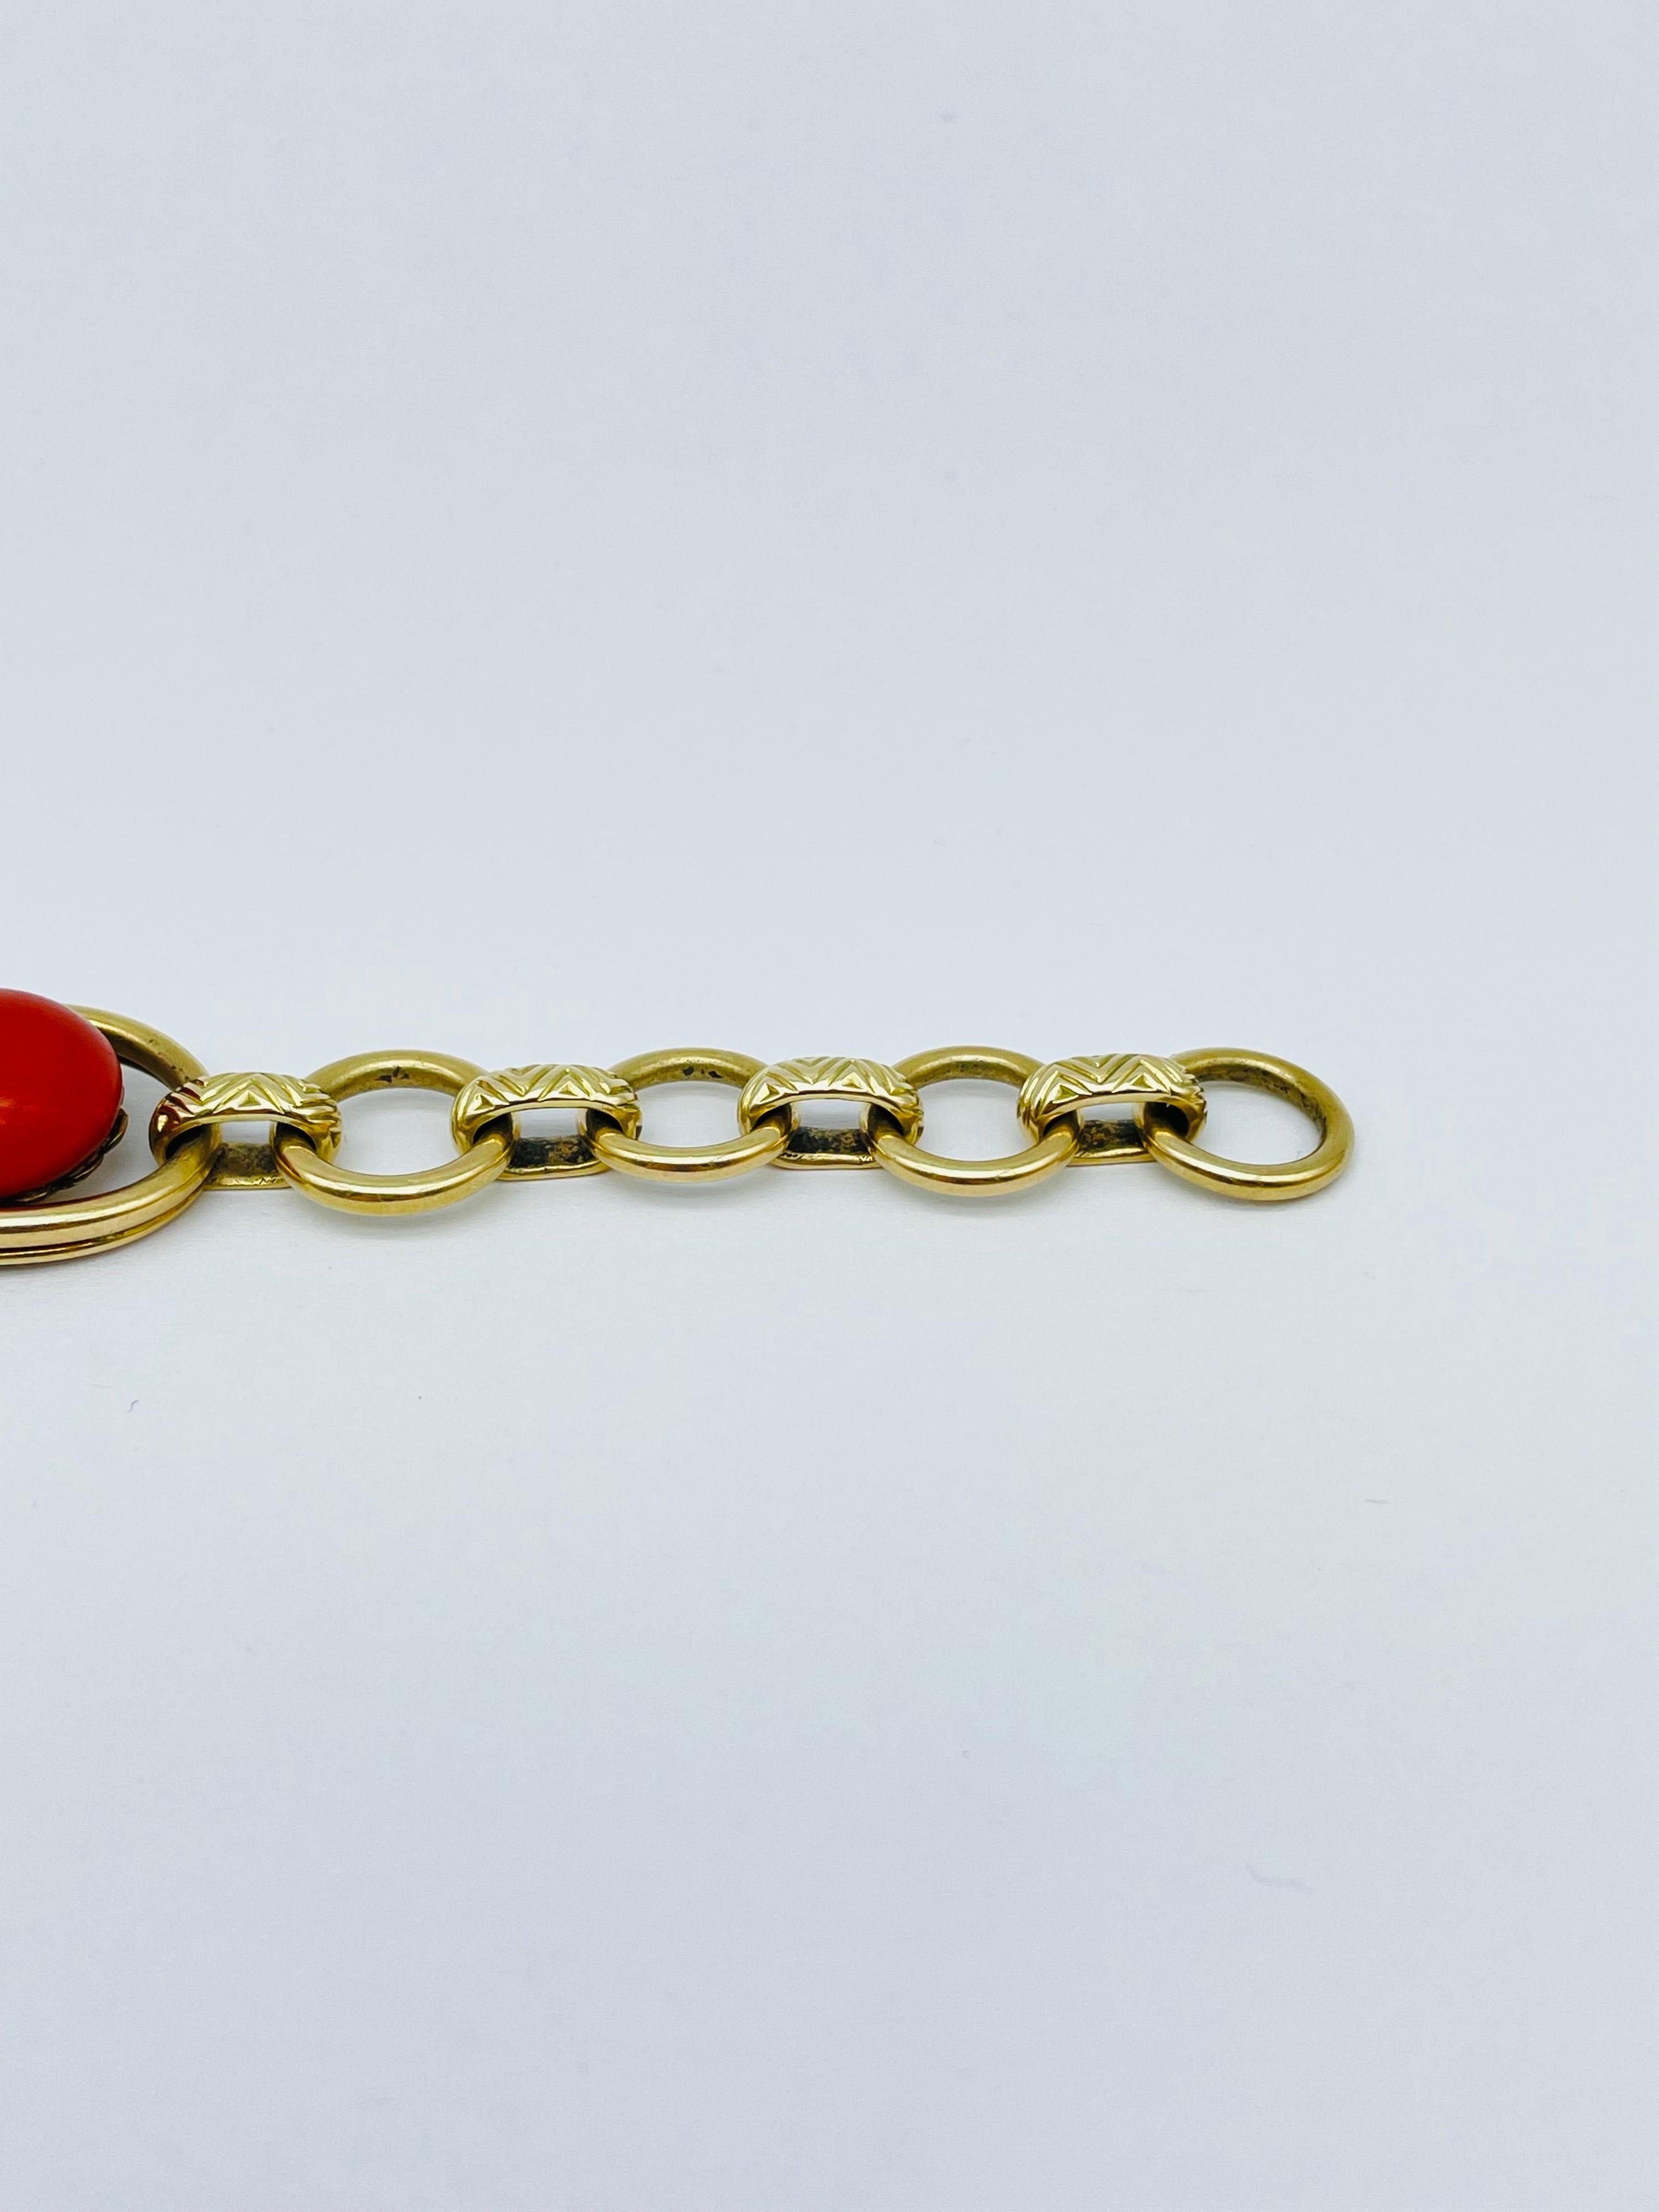 Cabochon Exceptional Bracelet 14k Gold Link Chain Red Coral For Sale